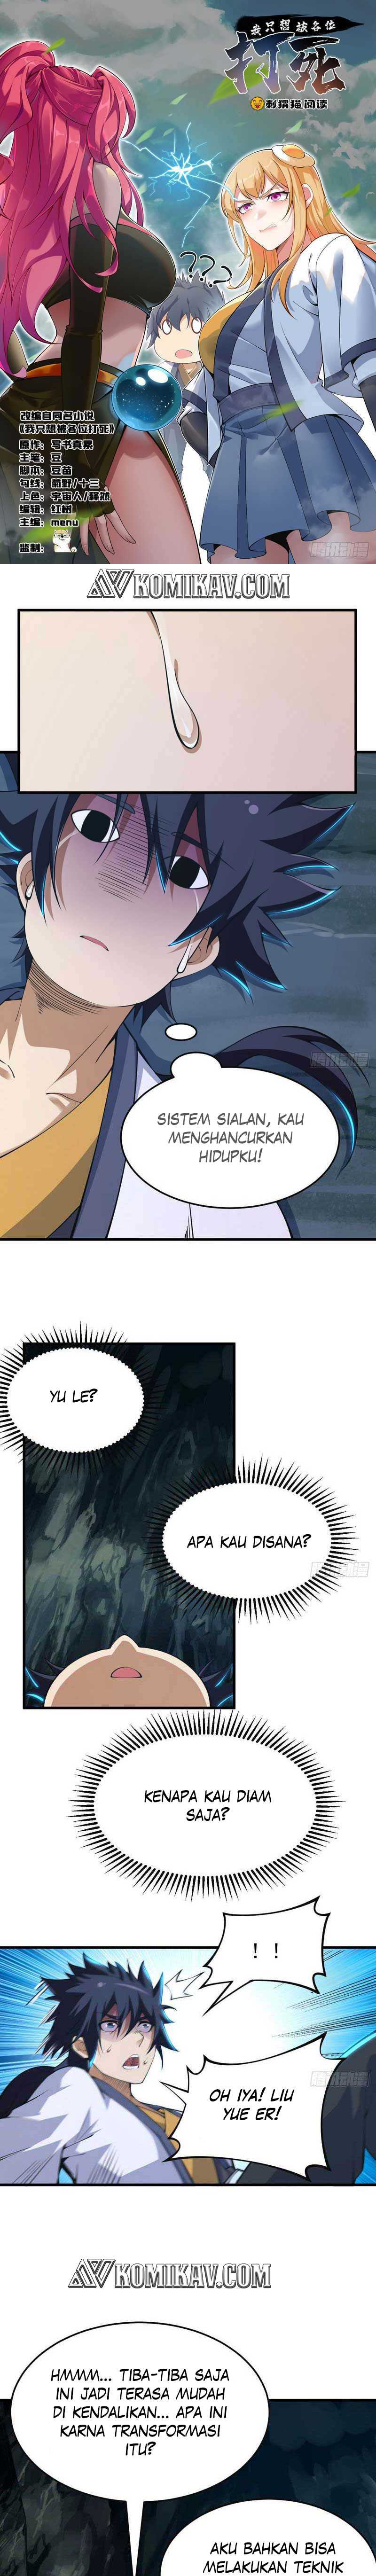 Dilarang COPAS - situs resmi www.mangacanblog.com - Komik i just want to be beaten to death by everyone 073 - chapter 73 74 Indonesia i just want to be beaten to death by everyone 073 - chapter 73 Terbaru 1|Baca Manga Komik Indonesia|Mangacan